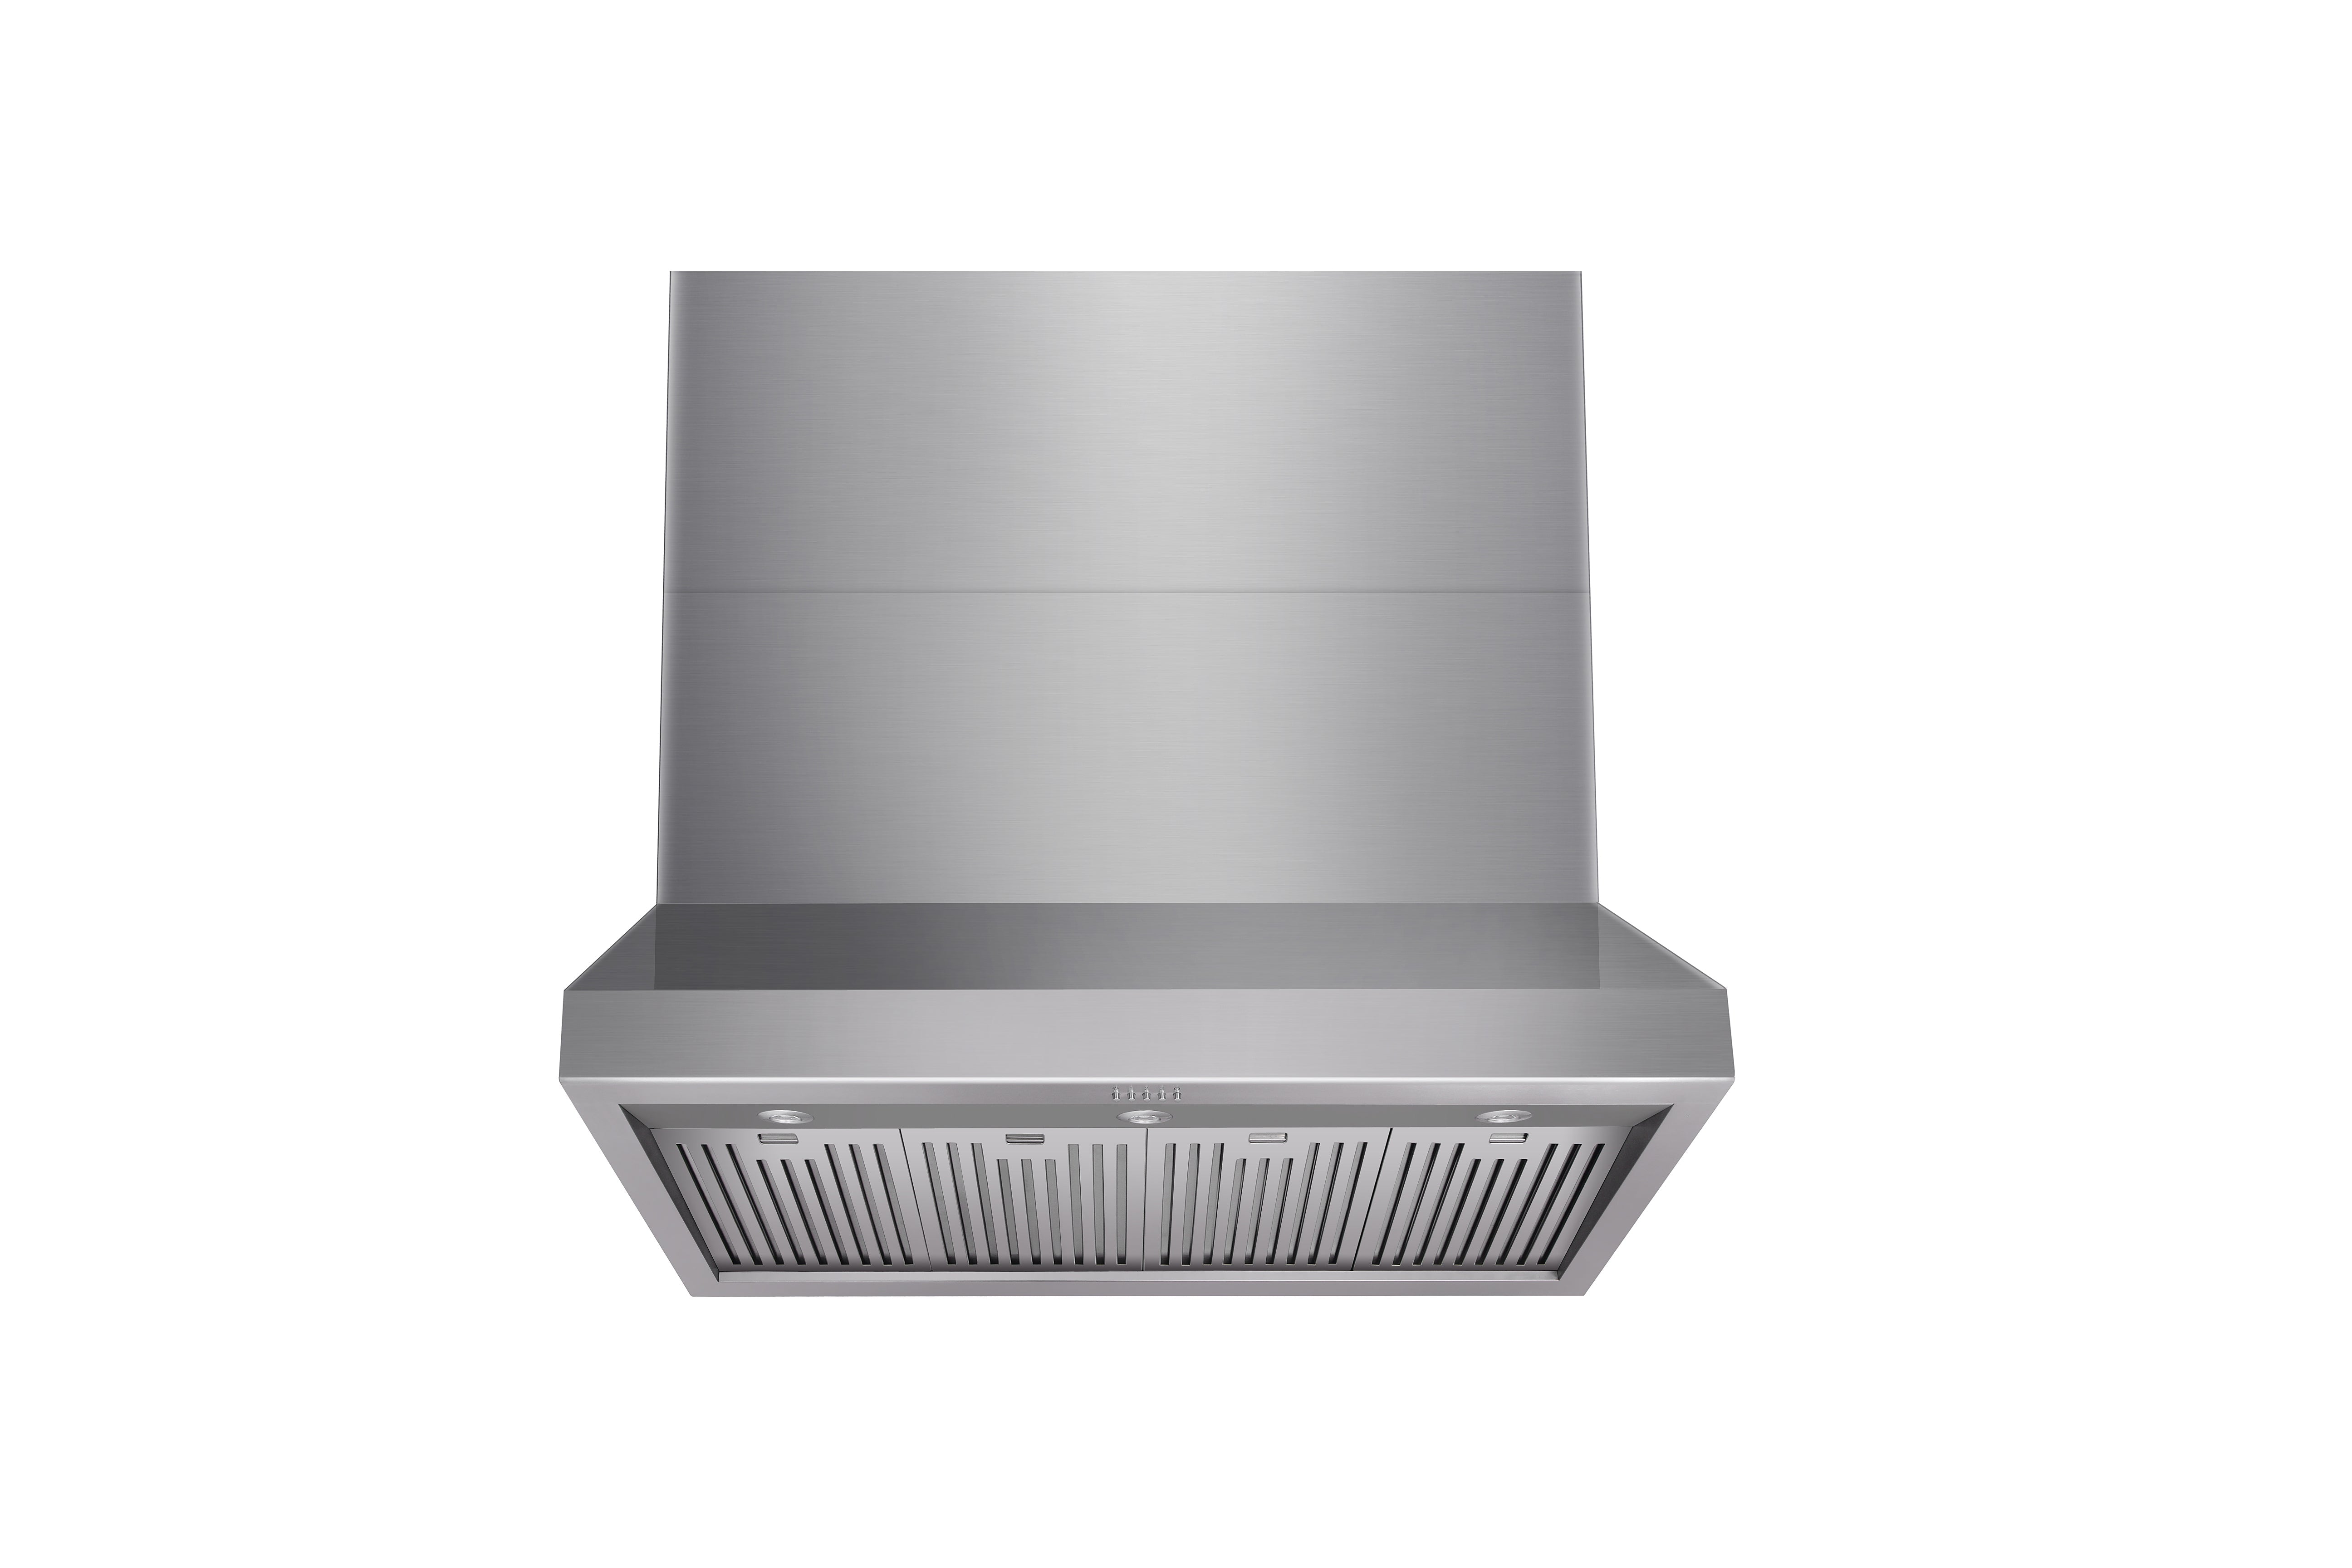 Thor Kitchen 48 Inch Professional Range Hood, 16.5 Inches Tall in Stainless Steel- Model TRH4805